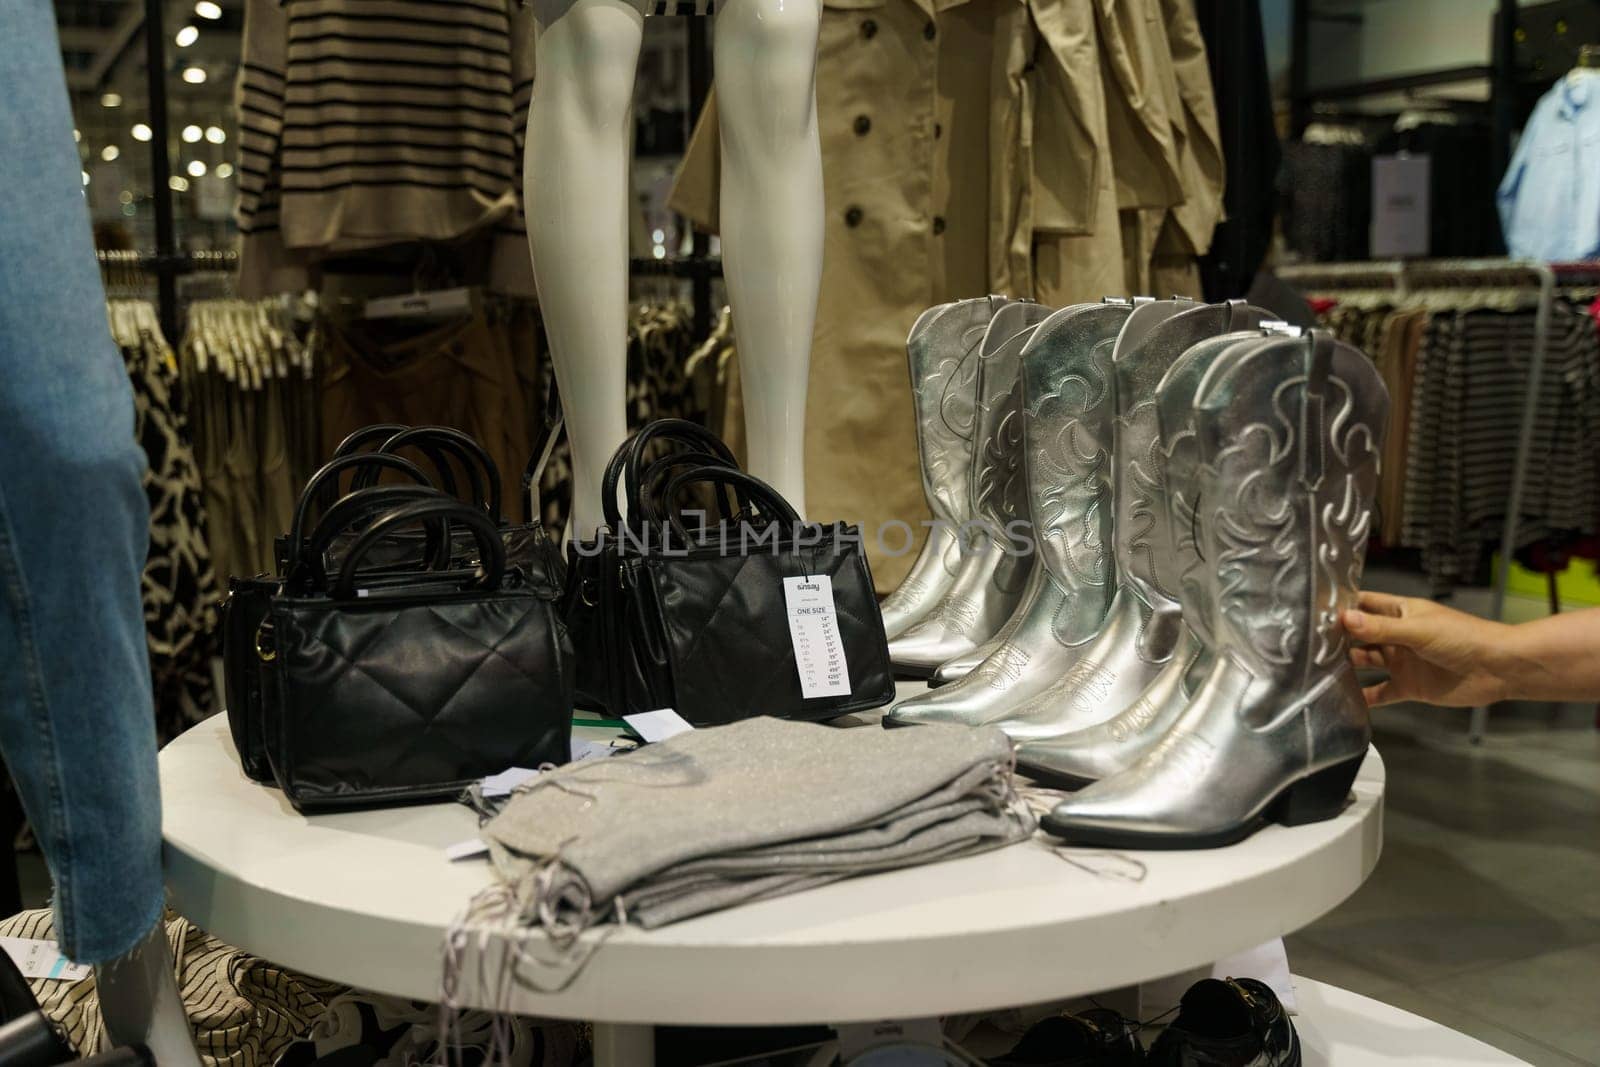 Klaipeda, Lithuania - August 10, 2023: A variety of boots and purses neatly arranged on a table, showcasing different styles and colors for sale or exhibition.